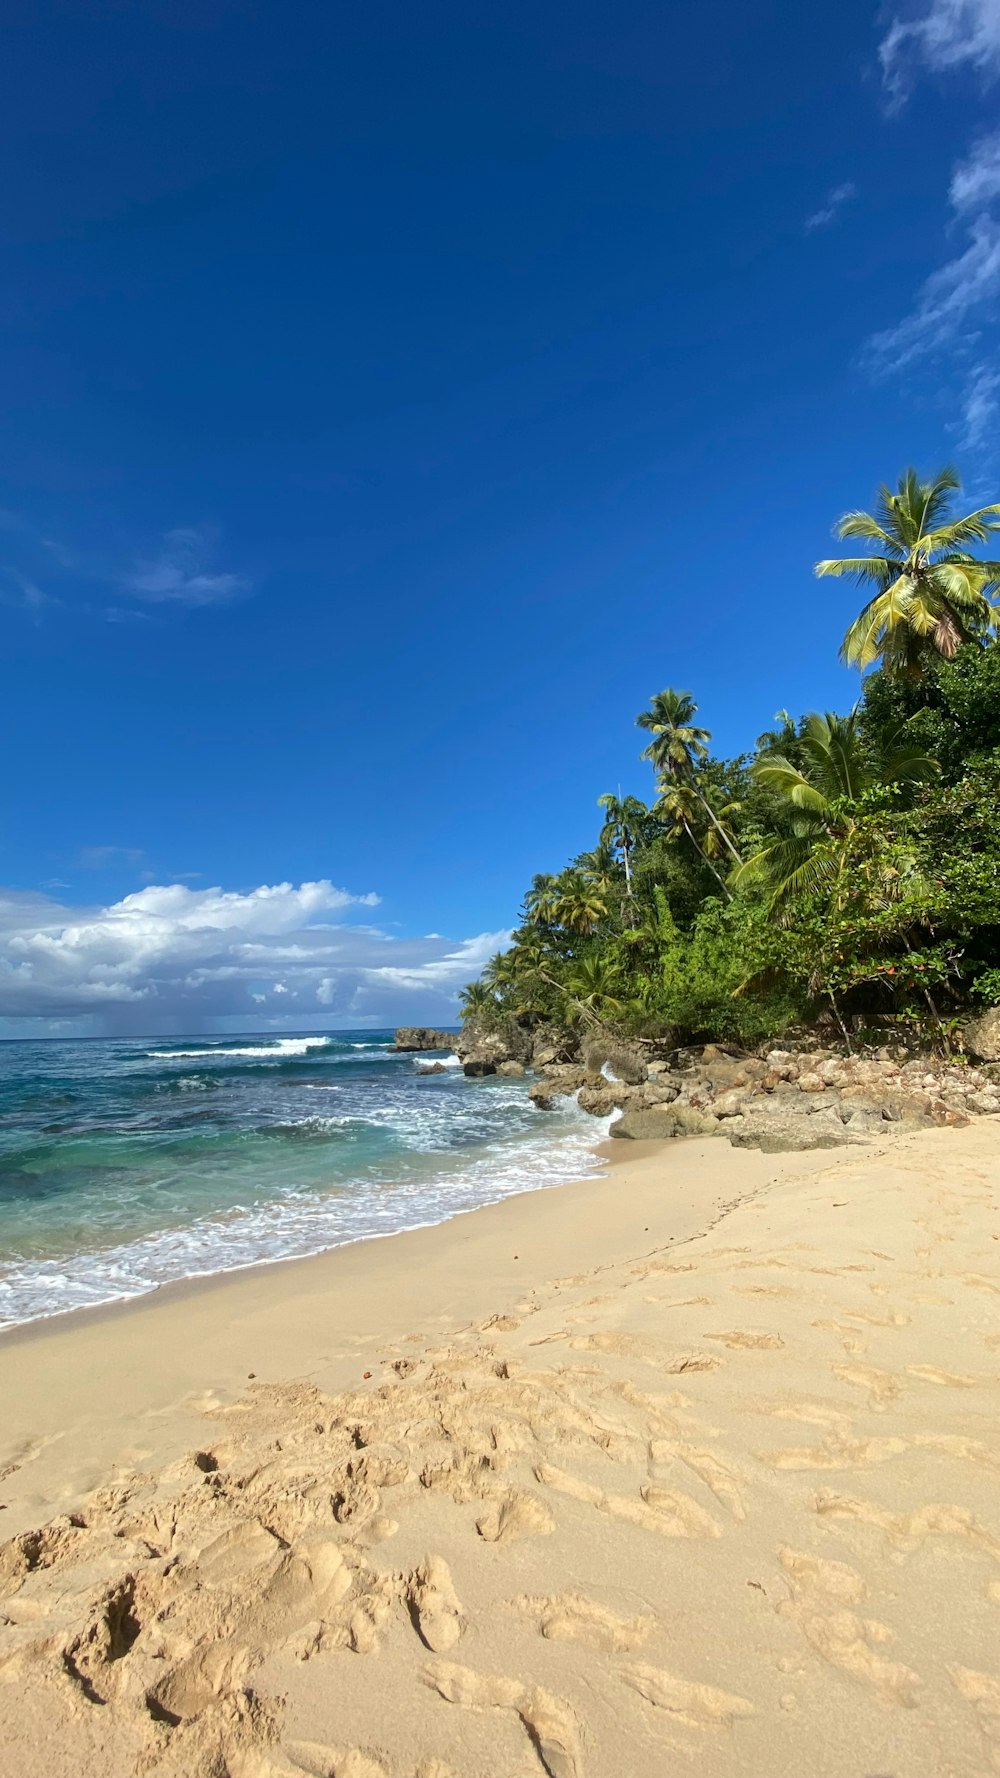 a sandy beach next to the ocean with palm trees